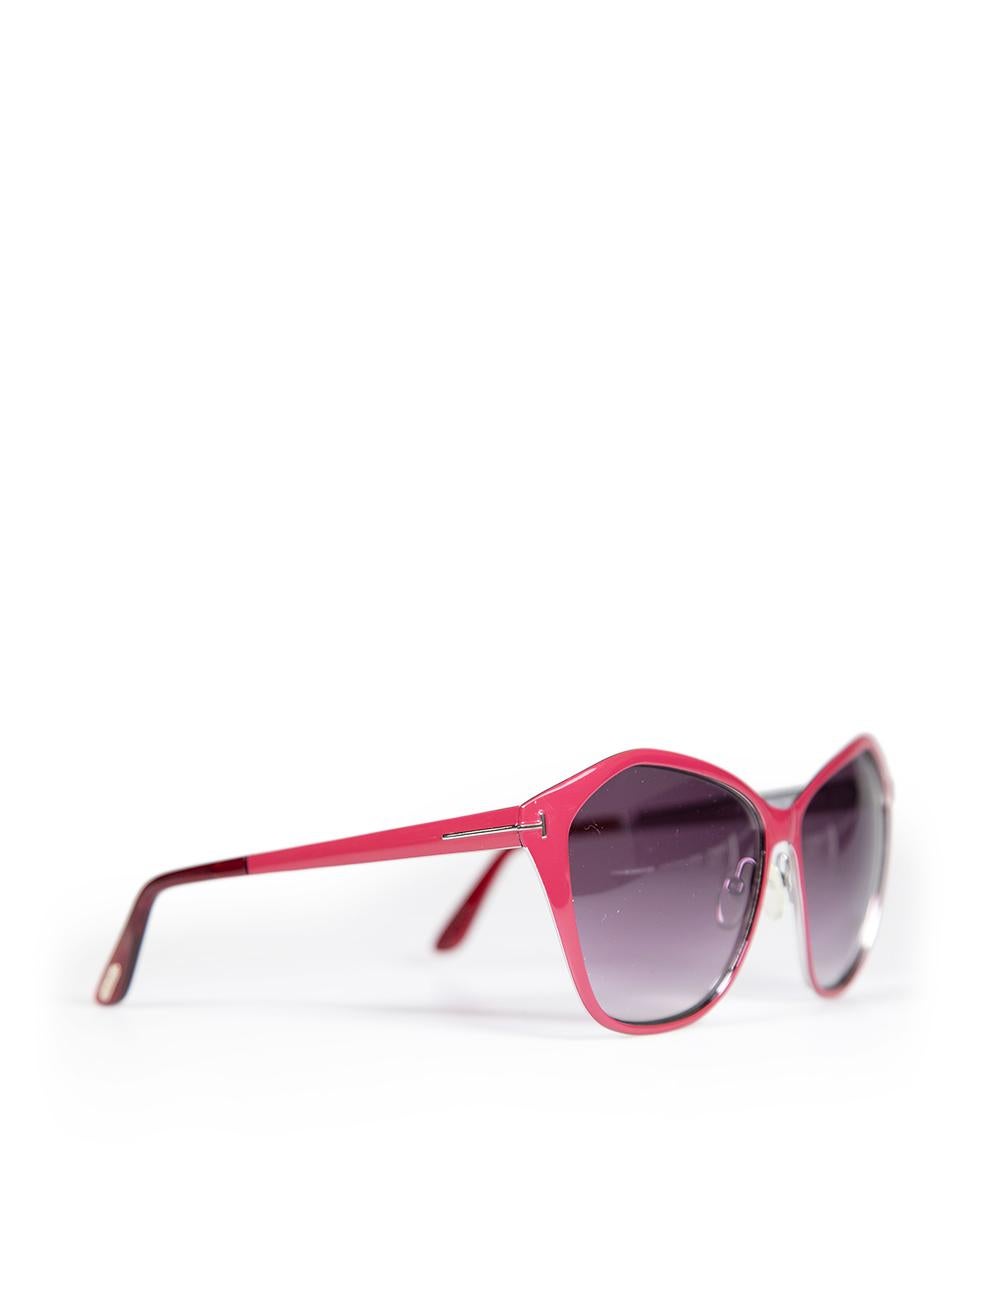 Tom Ford Lena 58 mm Shiny Bordeaux Sunglasses In New Condition For Sale In London, GB